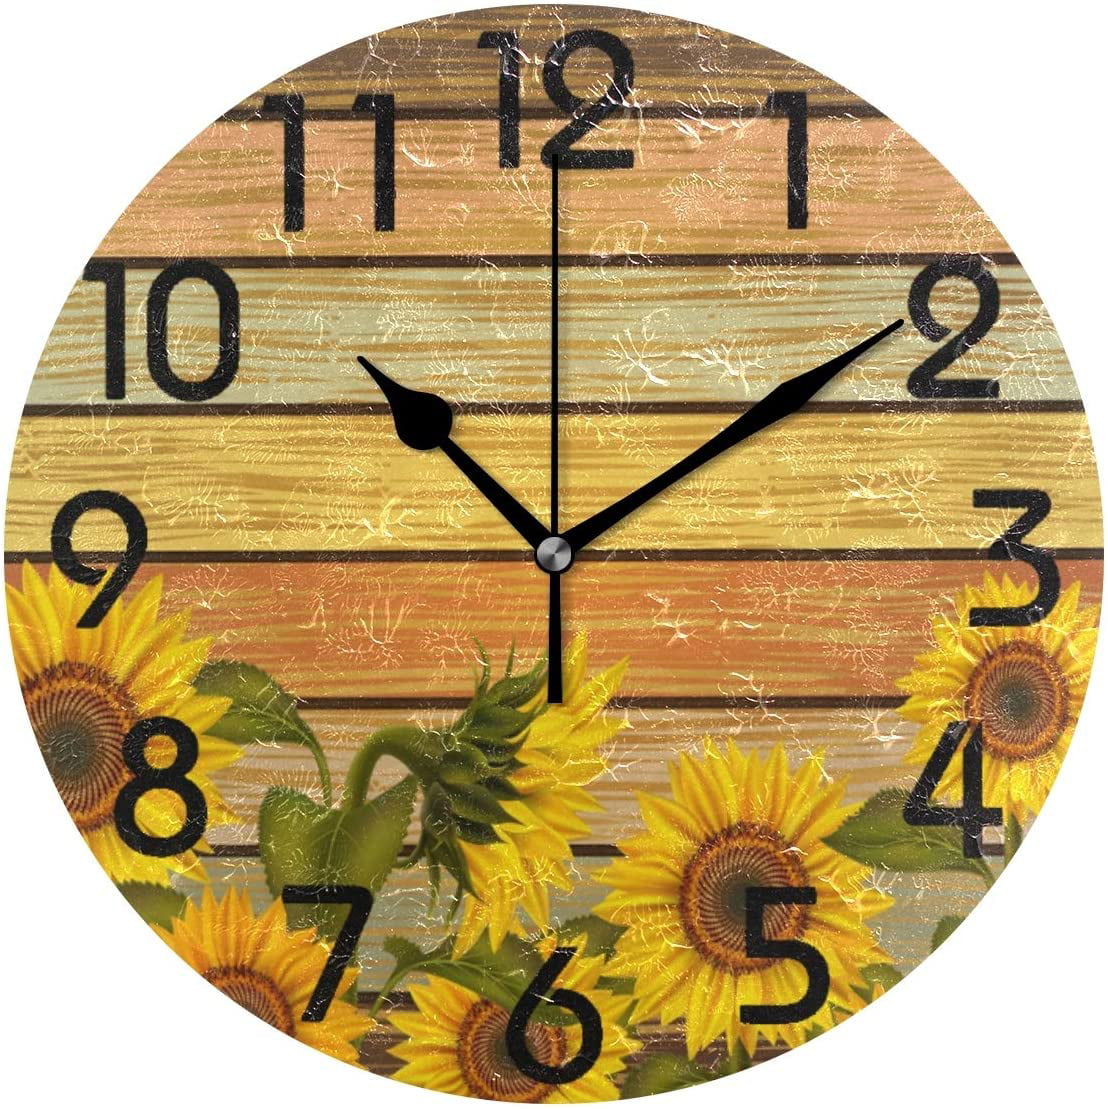 Vintage Round Wooden Wall Clock Rustic Sunflower Home Office Wall Clock 